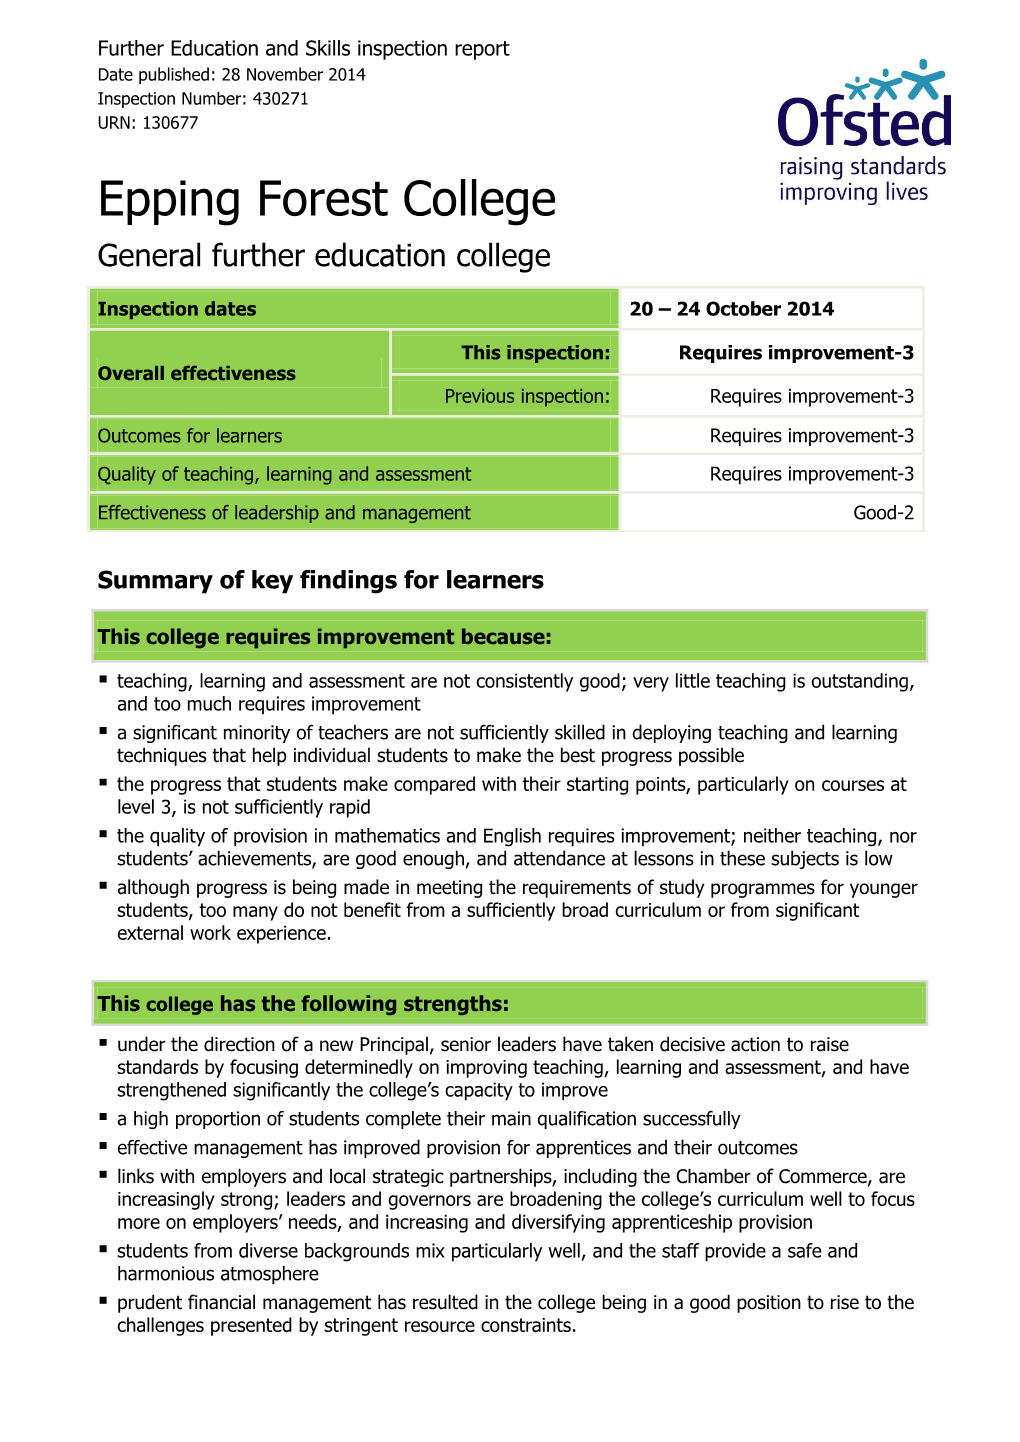 Epping Forest College General Further Education College